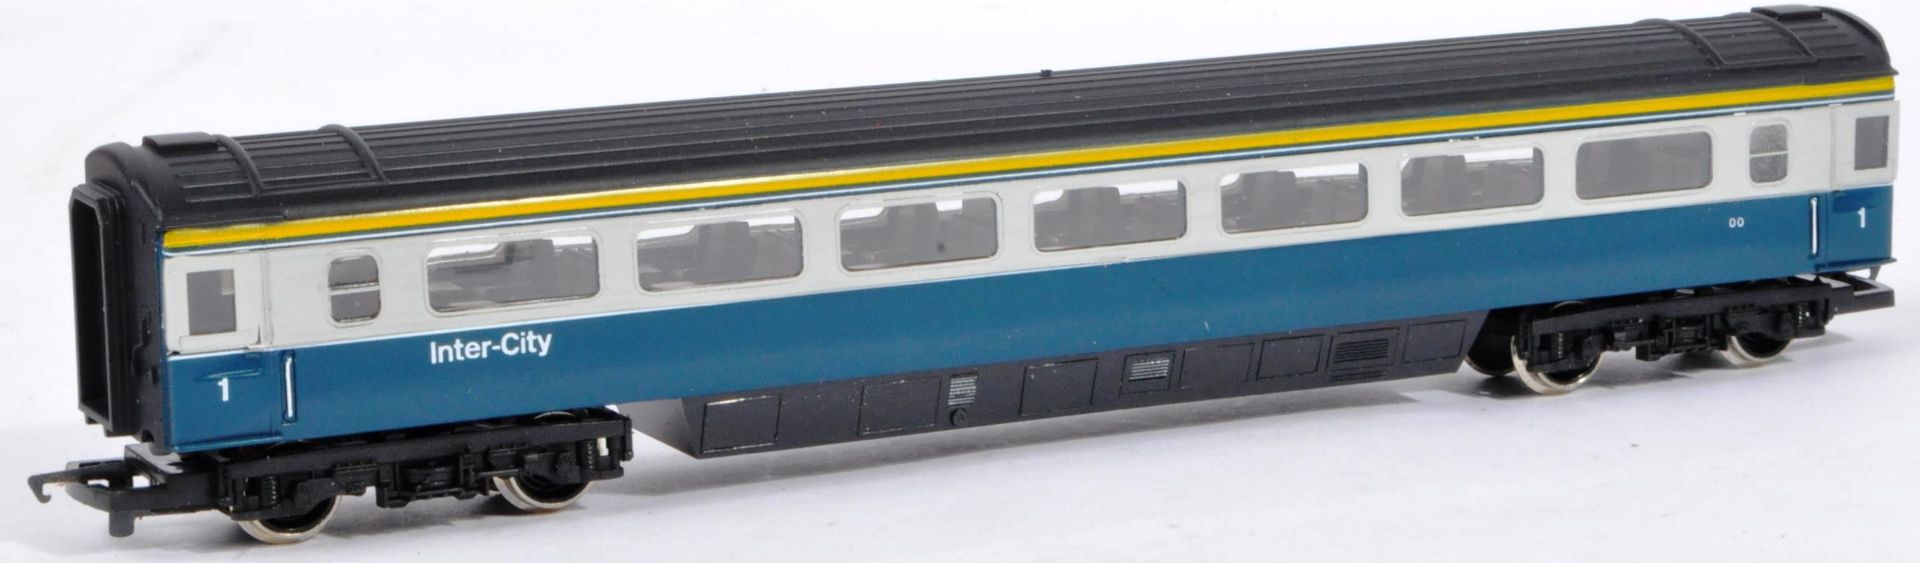 COLLECTION HORNBY 00 GAUGE MODEL RAILWAY DIESEL LOCOS & CARRIAGES - Image 7 of 9